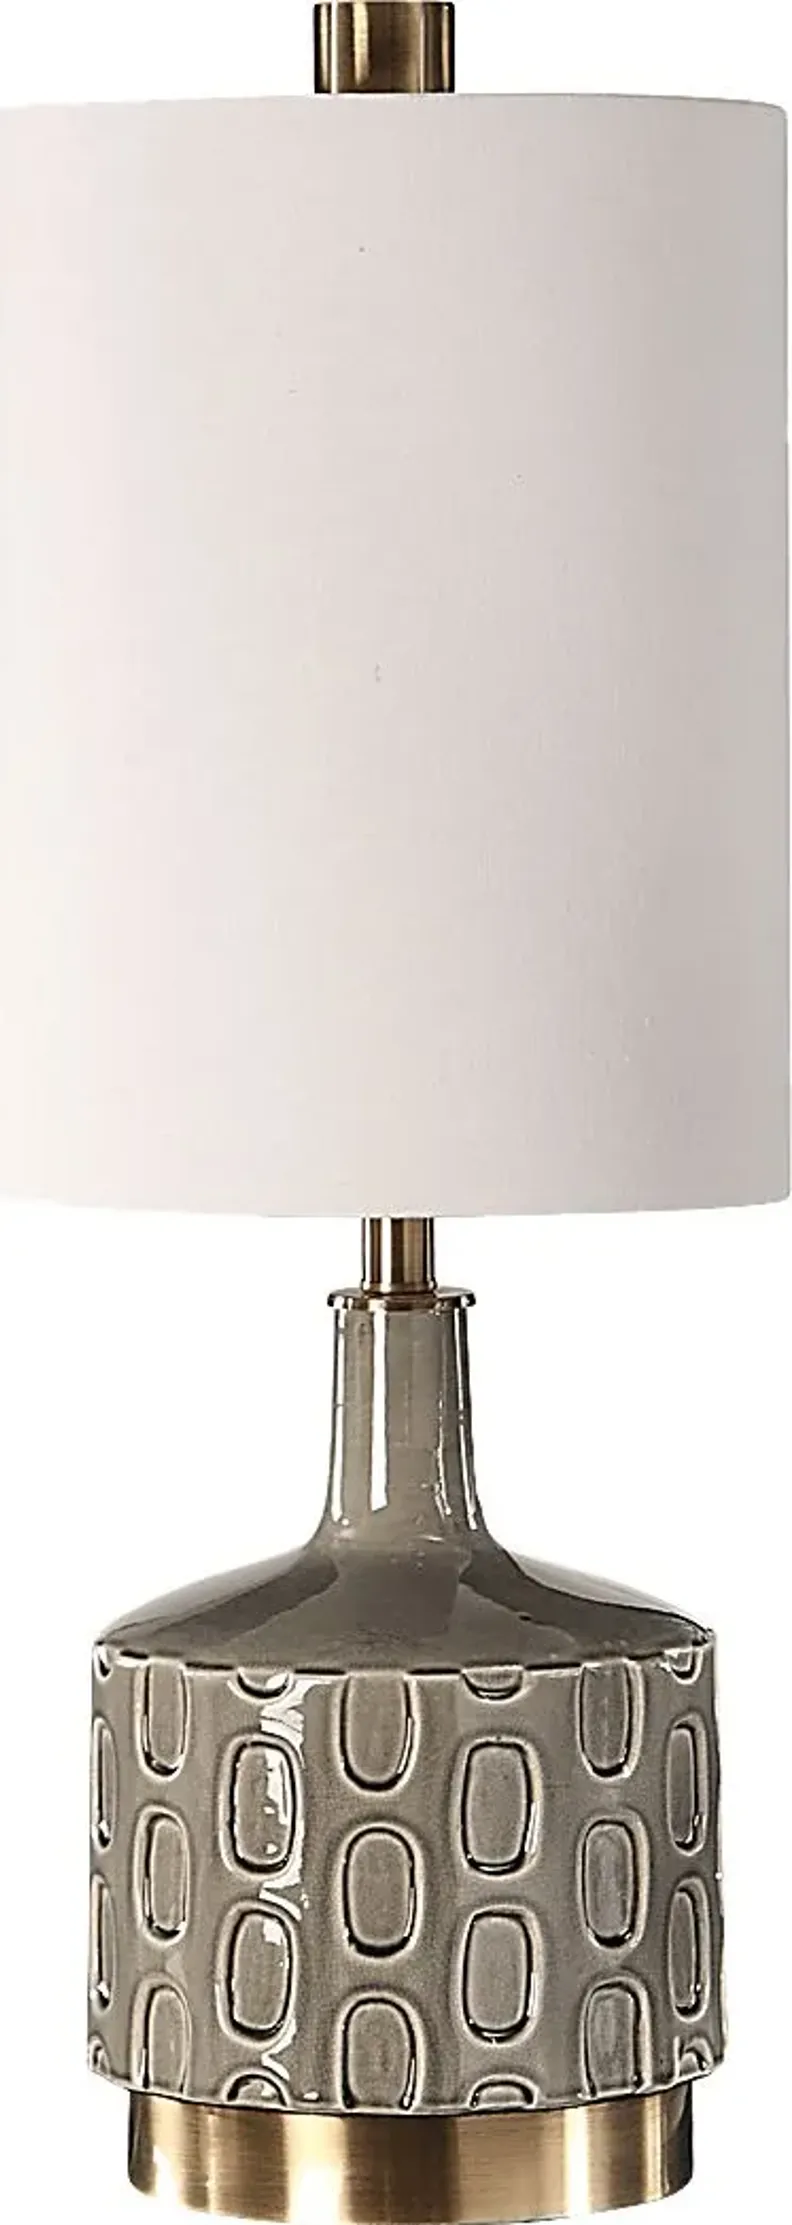 Medwell Alley Gray Lamp